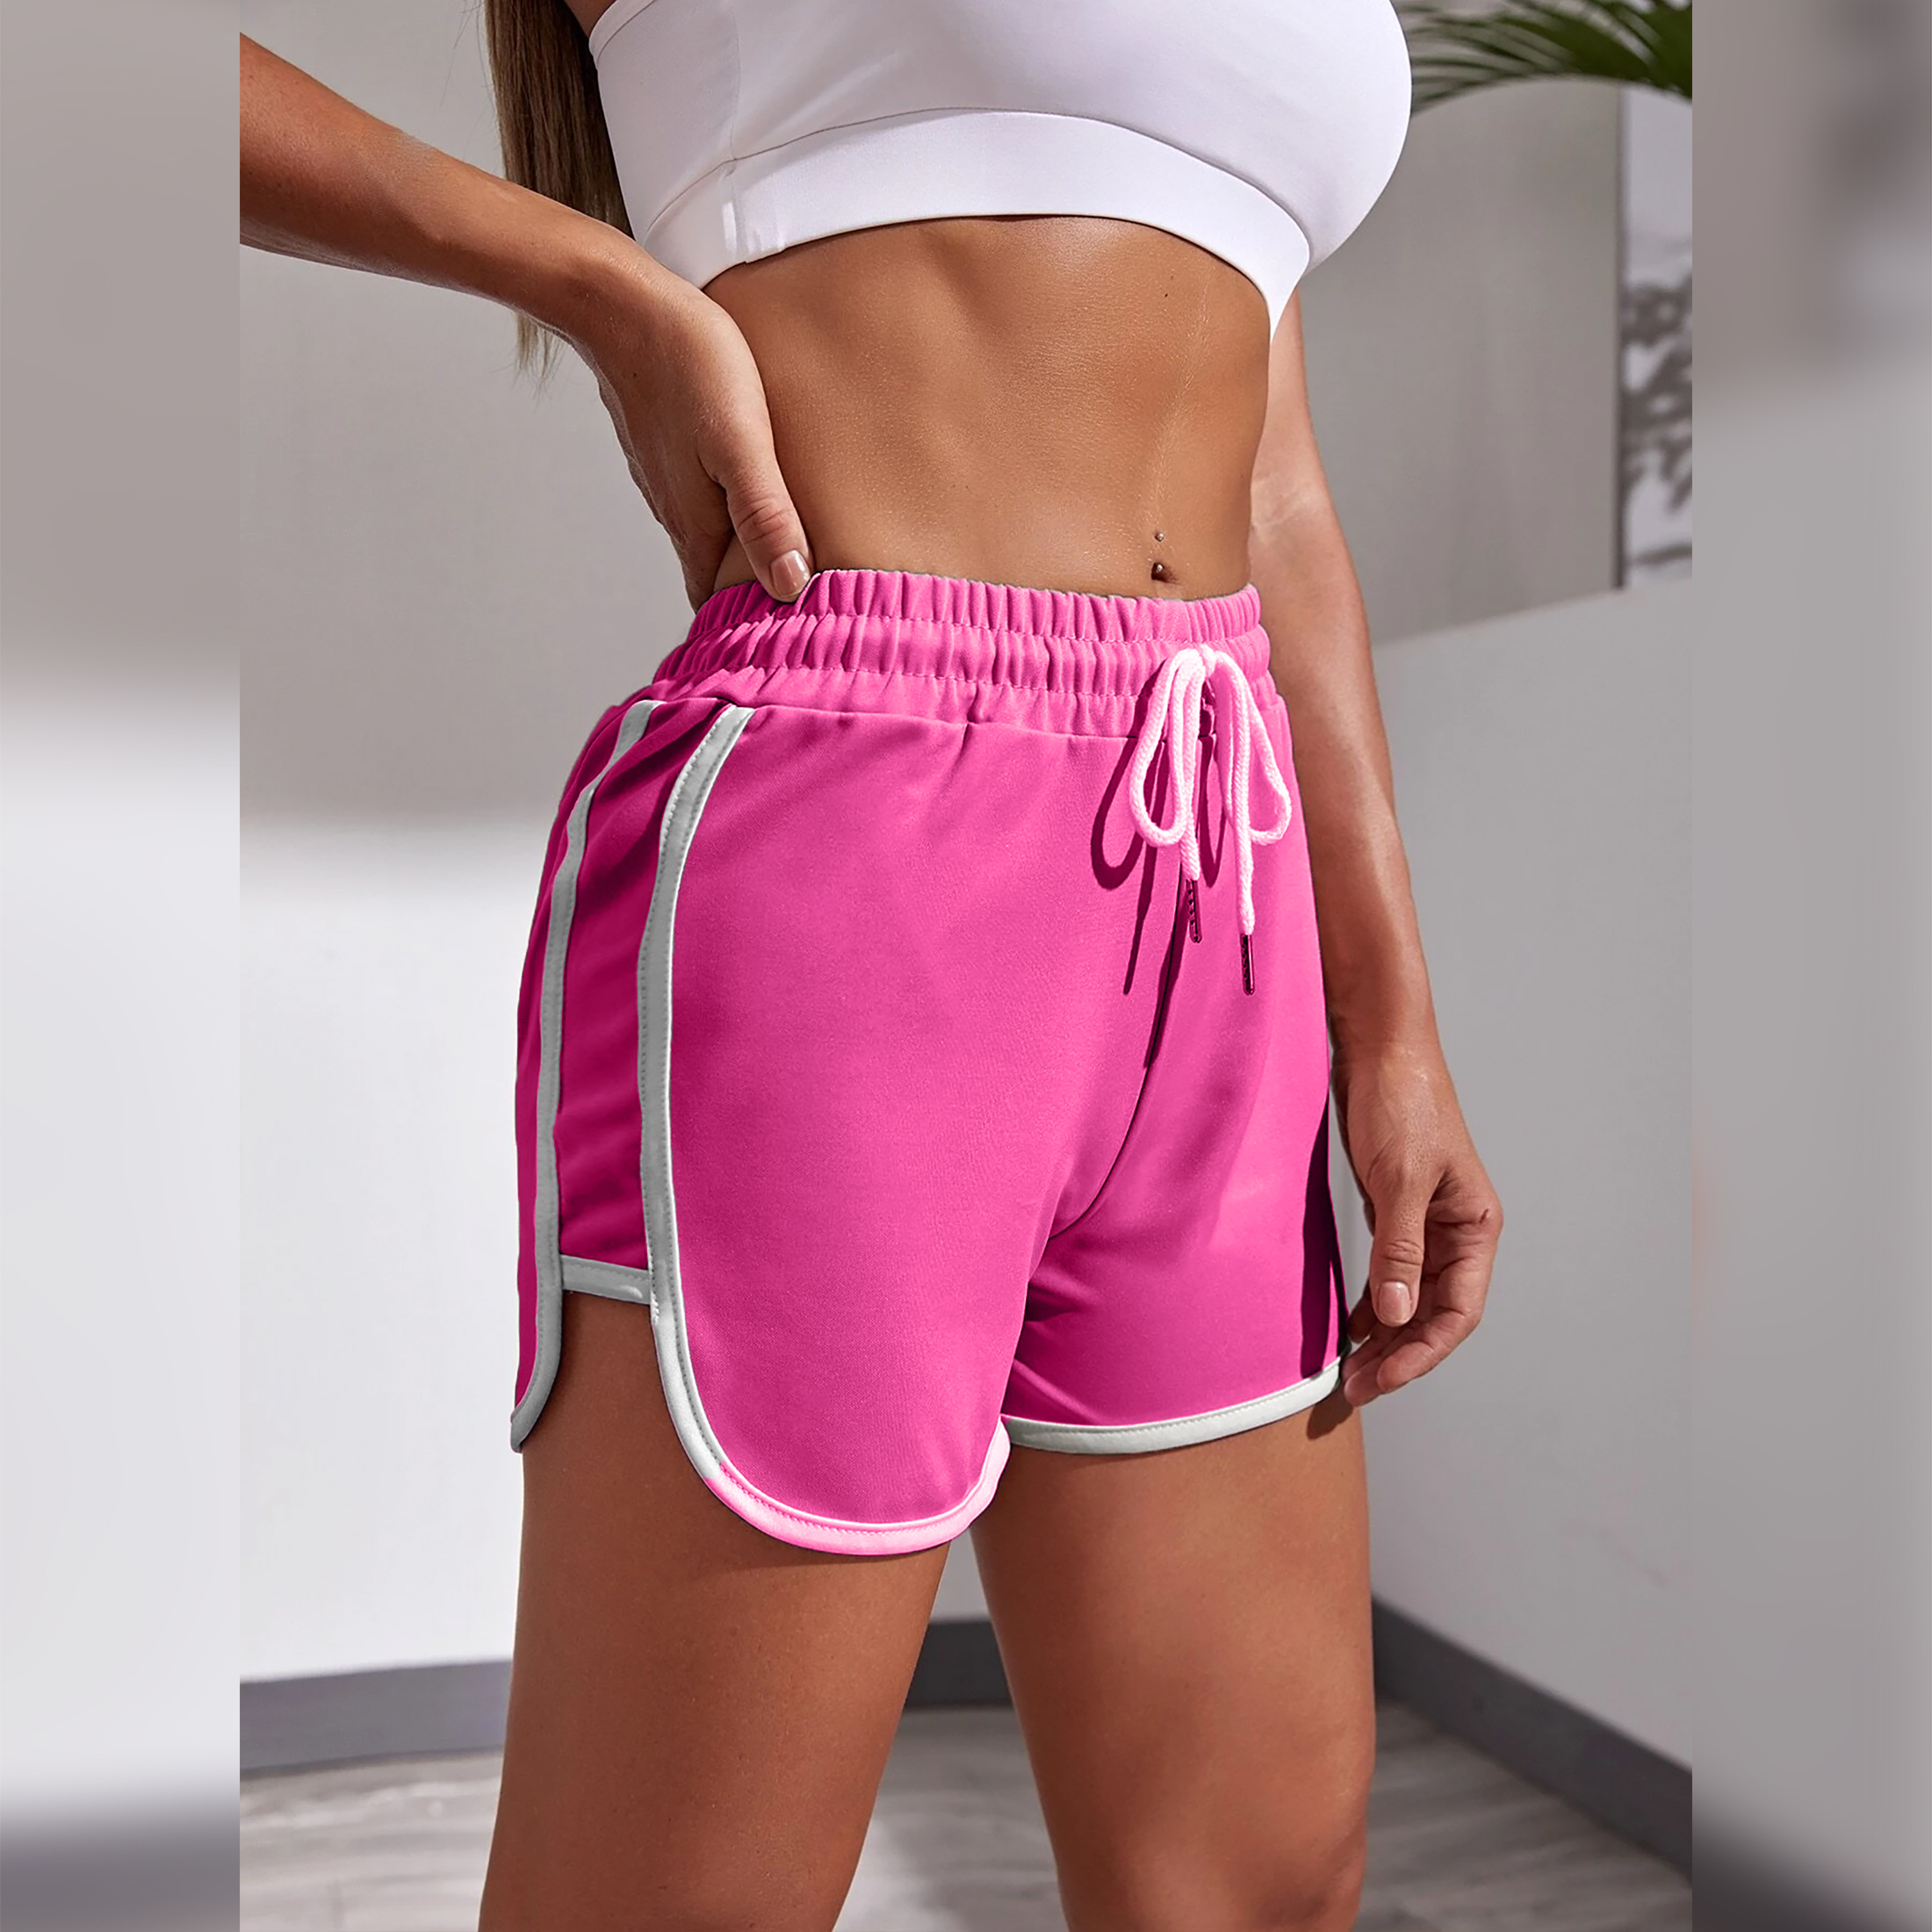 3-Pack Women's Dolphin Shorts Soft Comfy Elastic Waist Running Athletic Workout Yoga Pants - XL